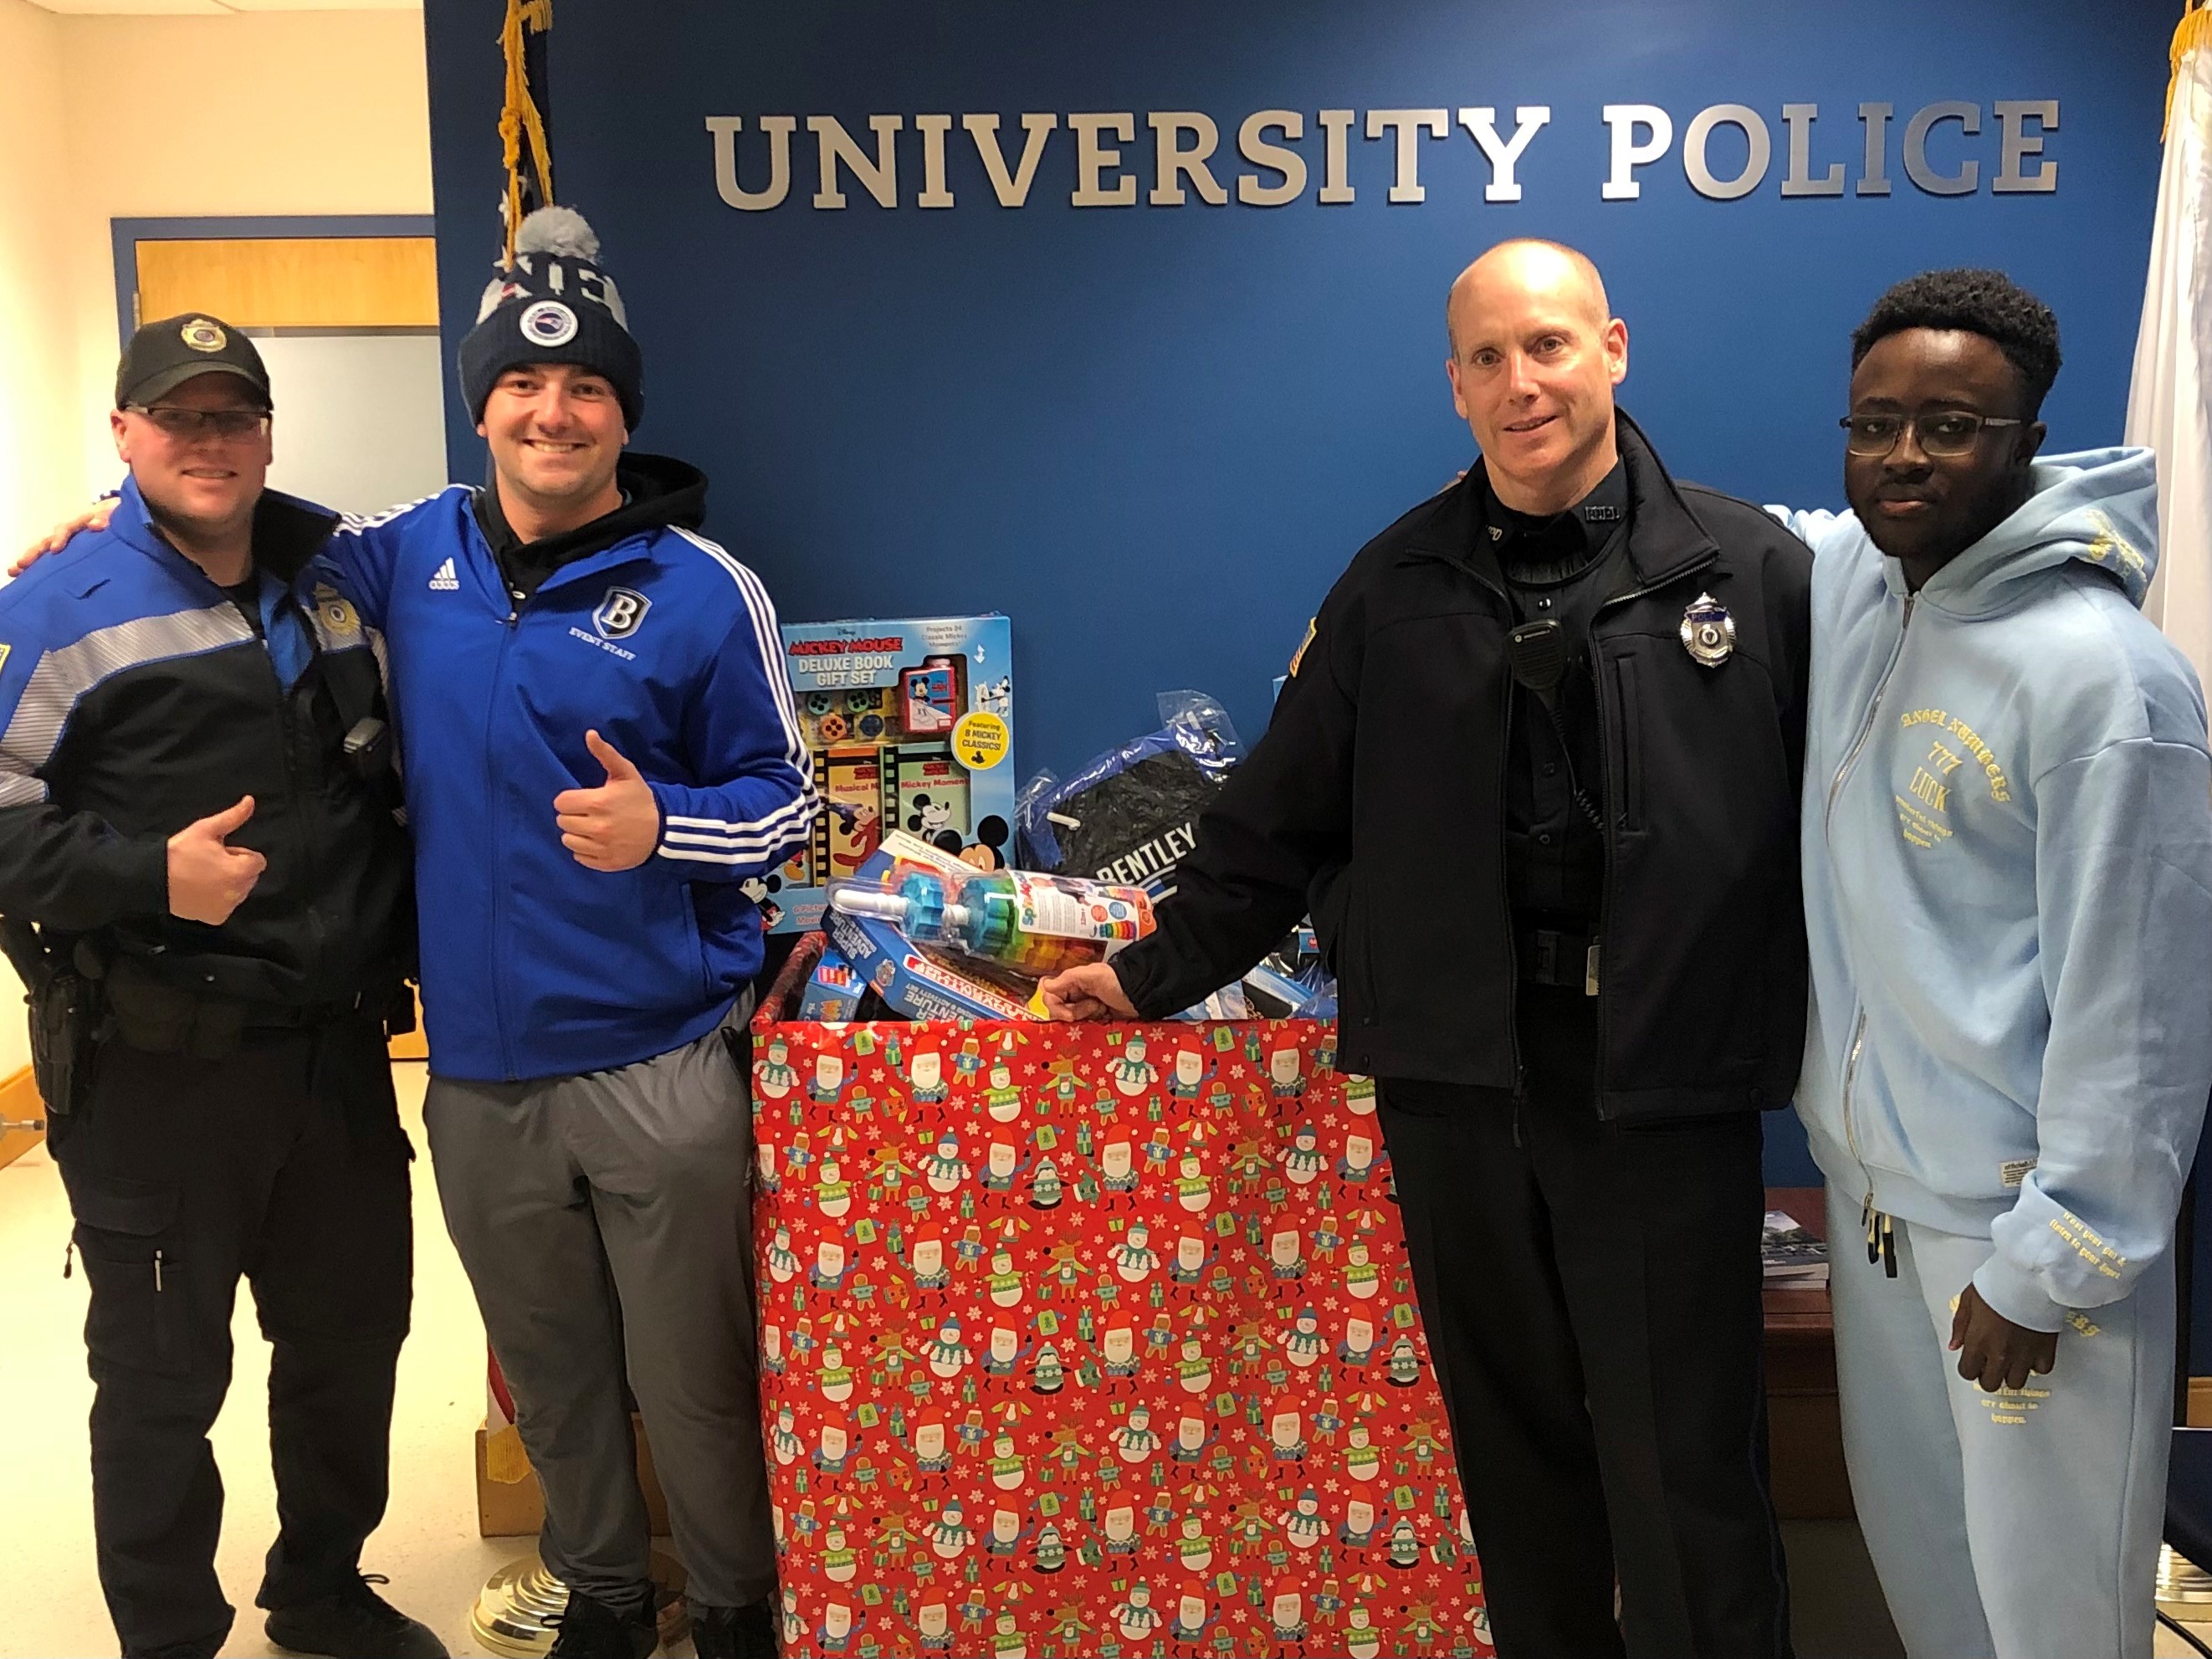 University police officers with Bentley students donating toys